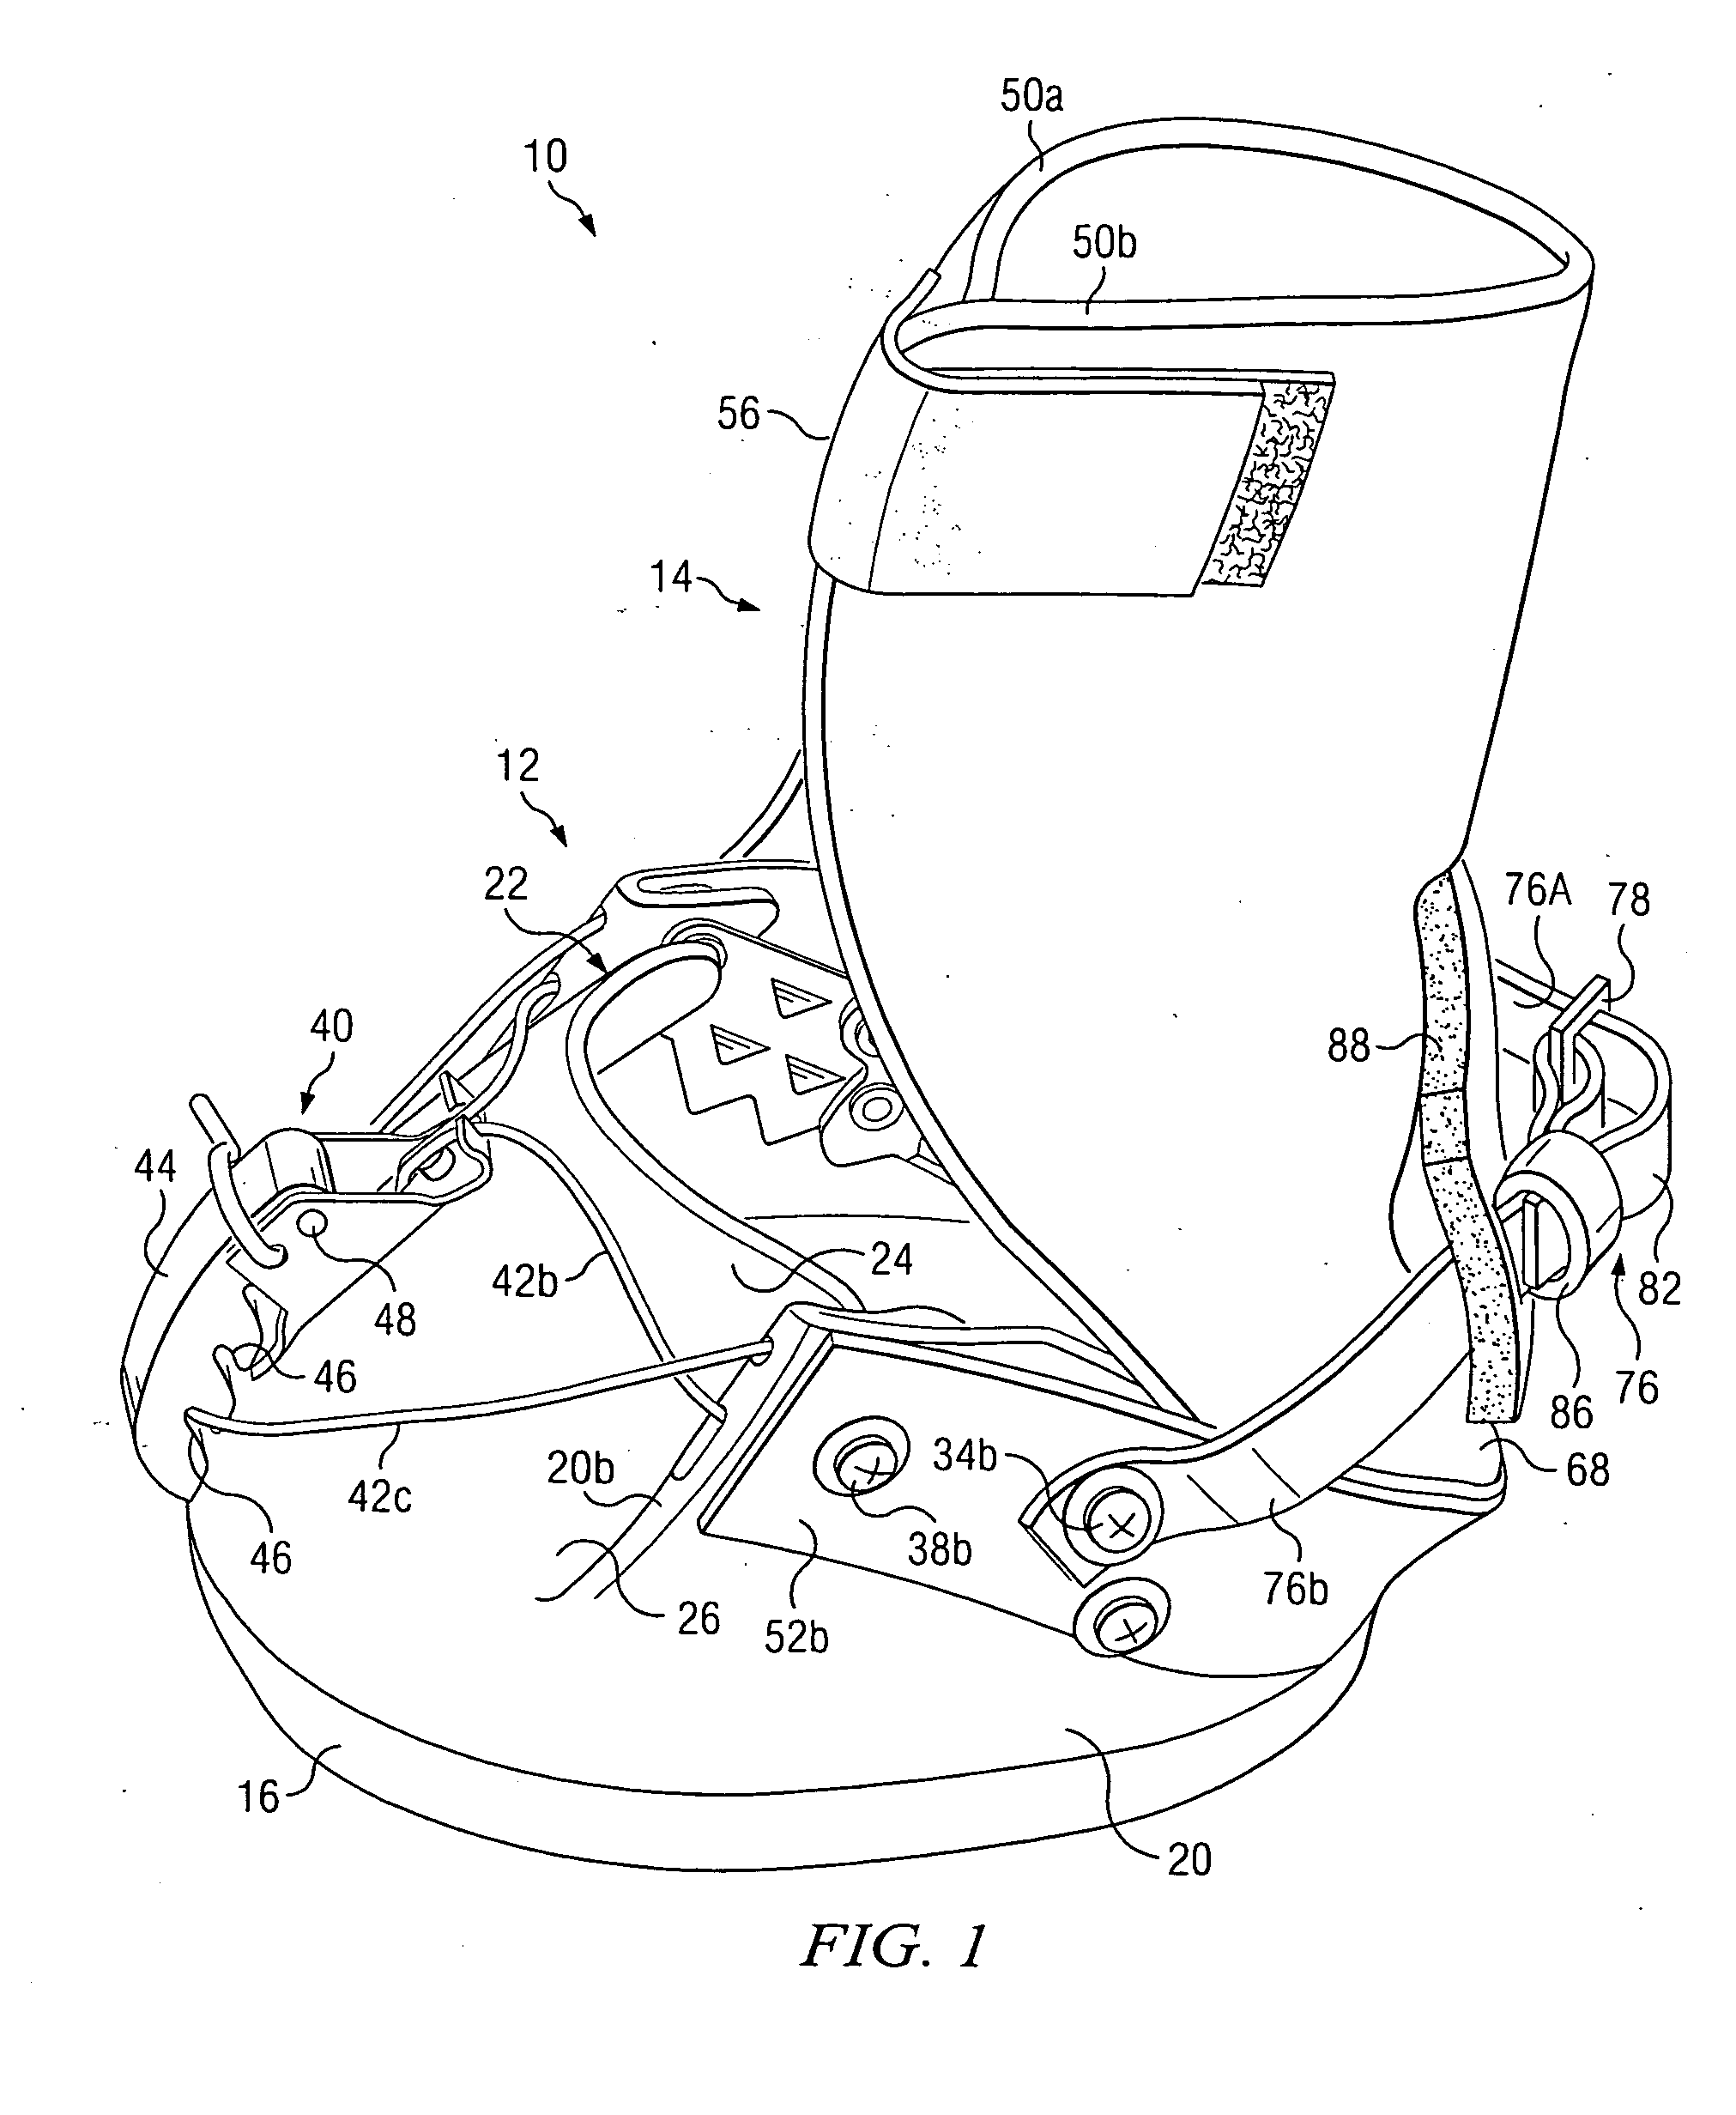 Horse boot with high-profile protective cuff